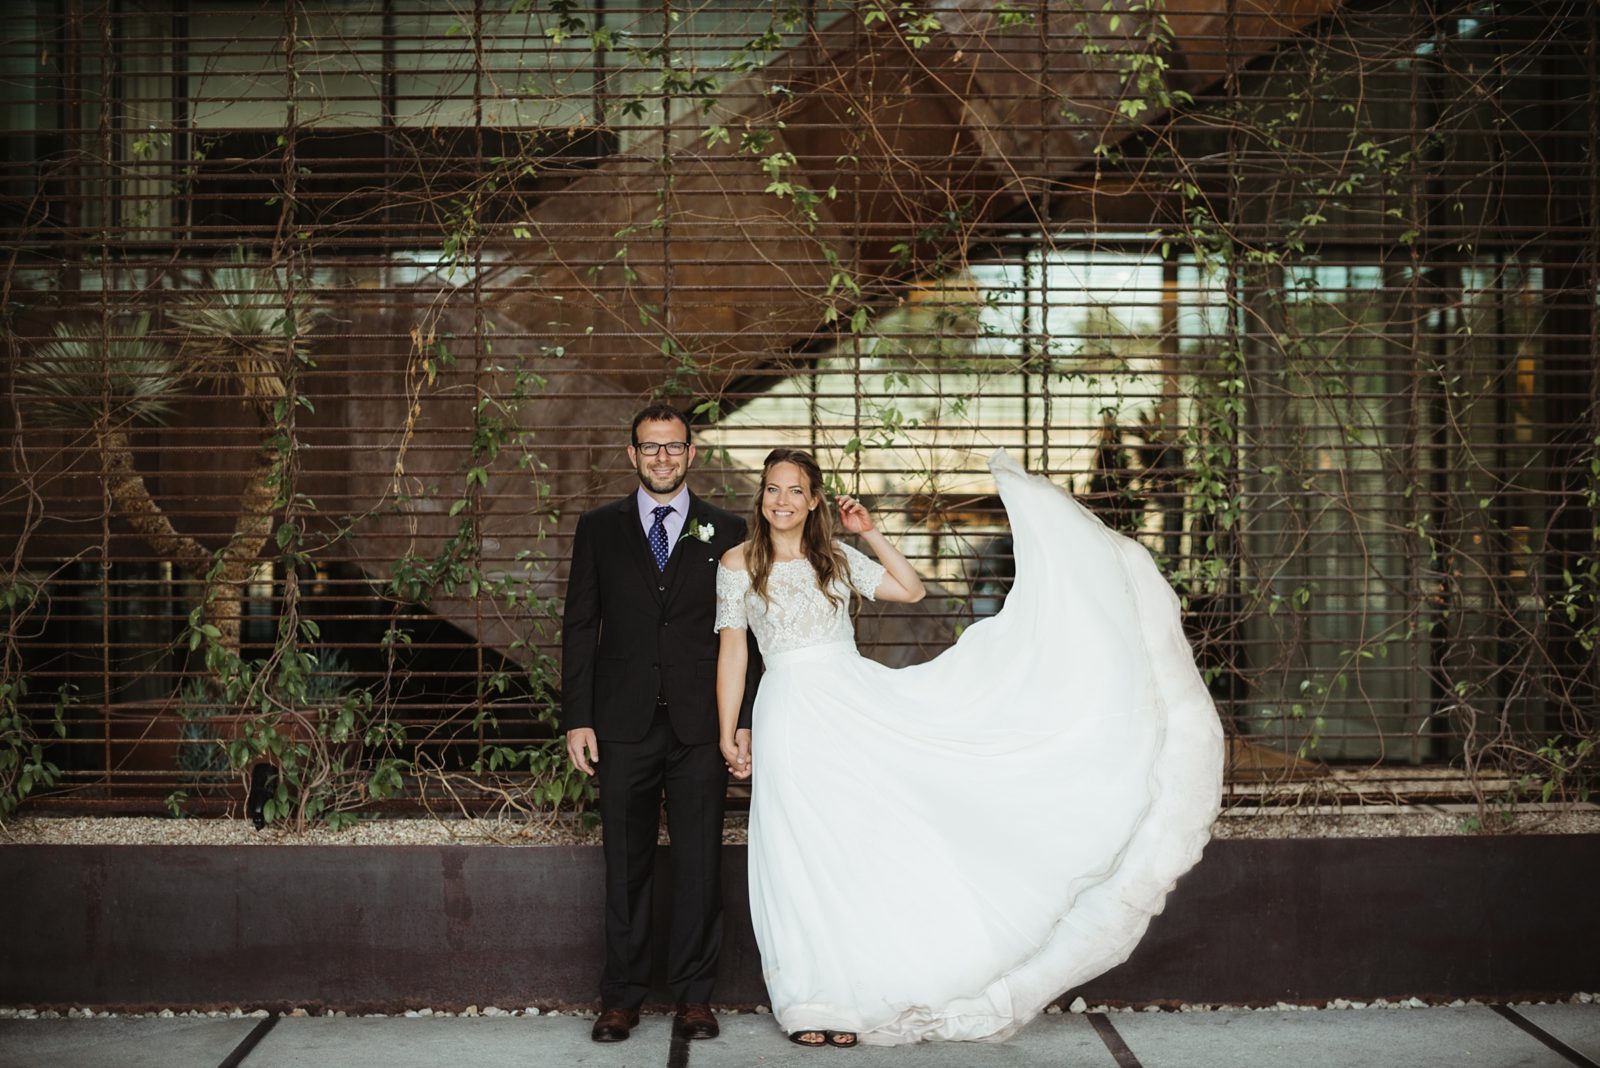 Stylish couple celebrating their elopement at The South Congress Hotel in Austin, Texas